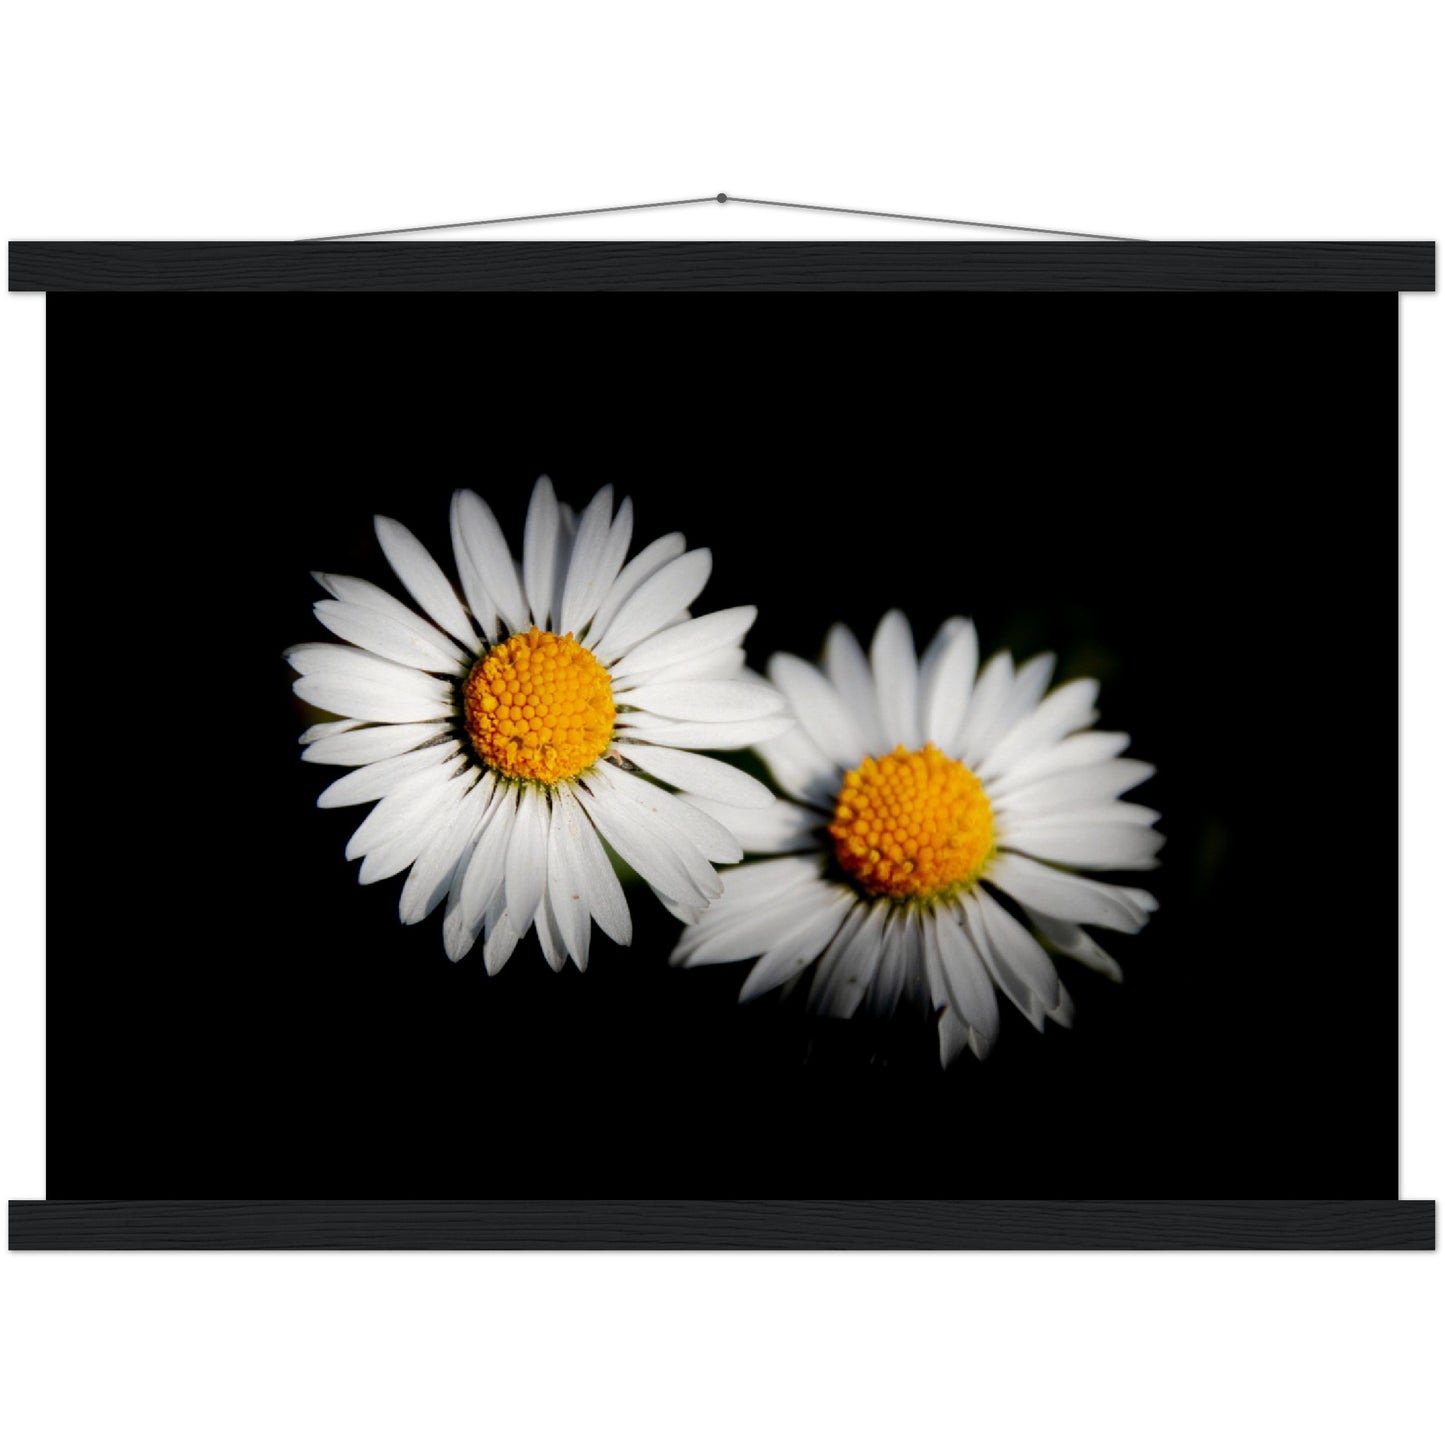 Two radiant daisies, premium poster made of museum-quality matt paper with wooden strips